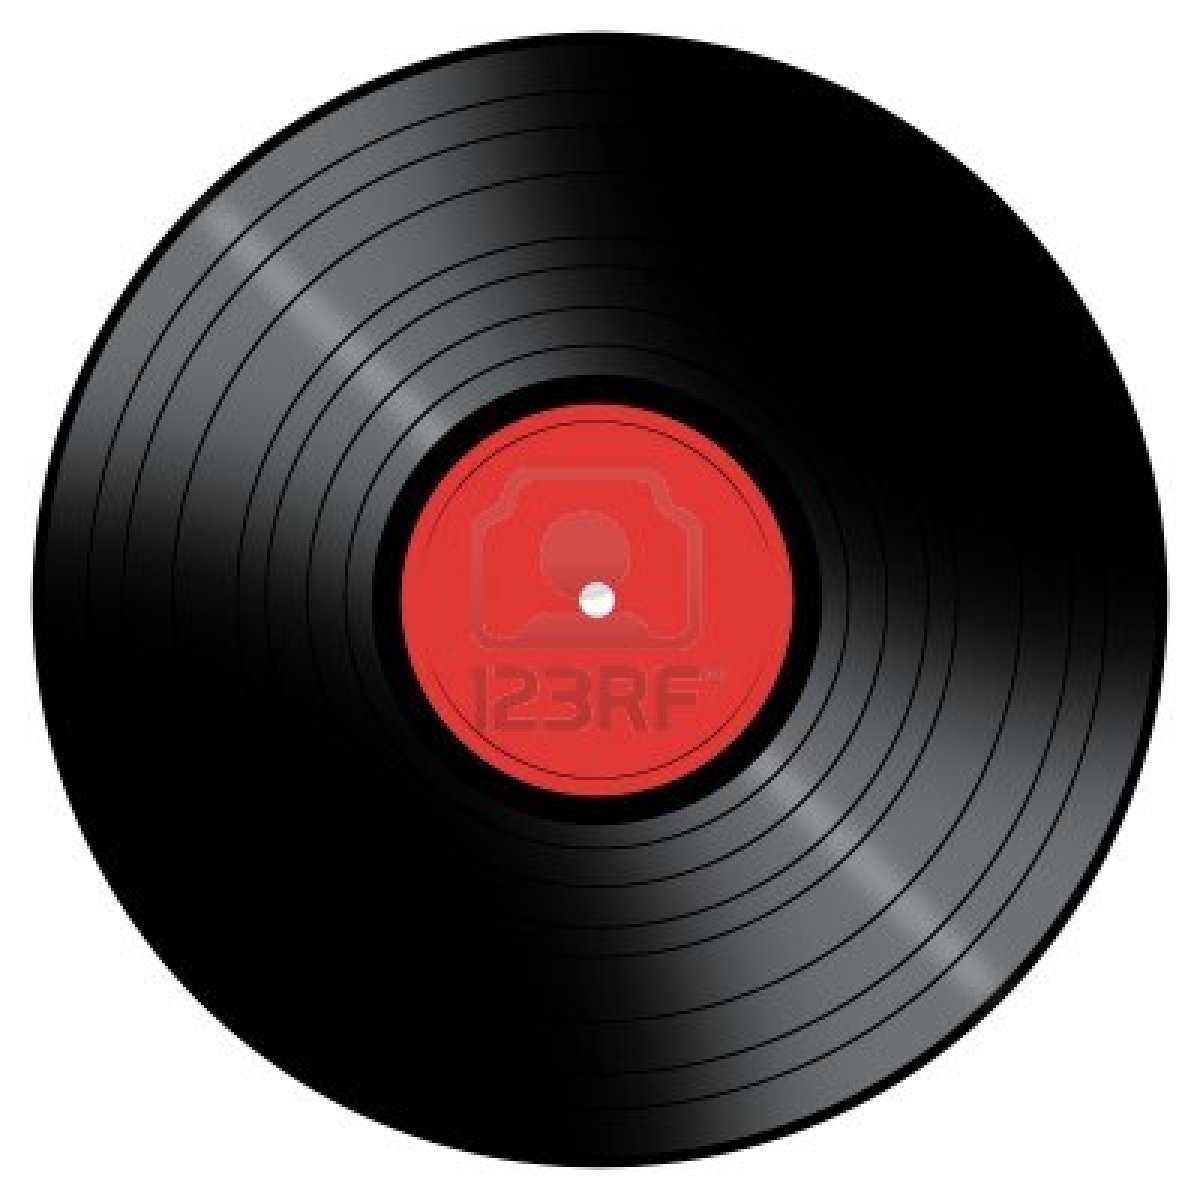 5027967 Vinyl Record With A Color Center On A White Background   Hub